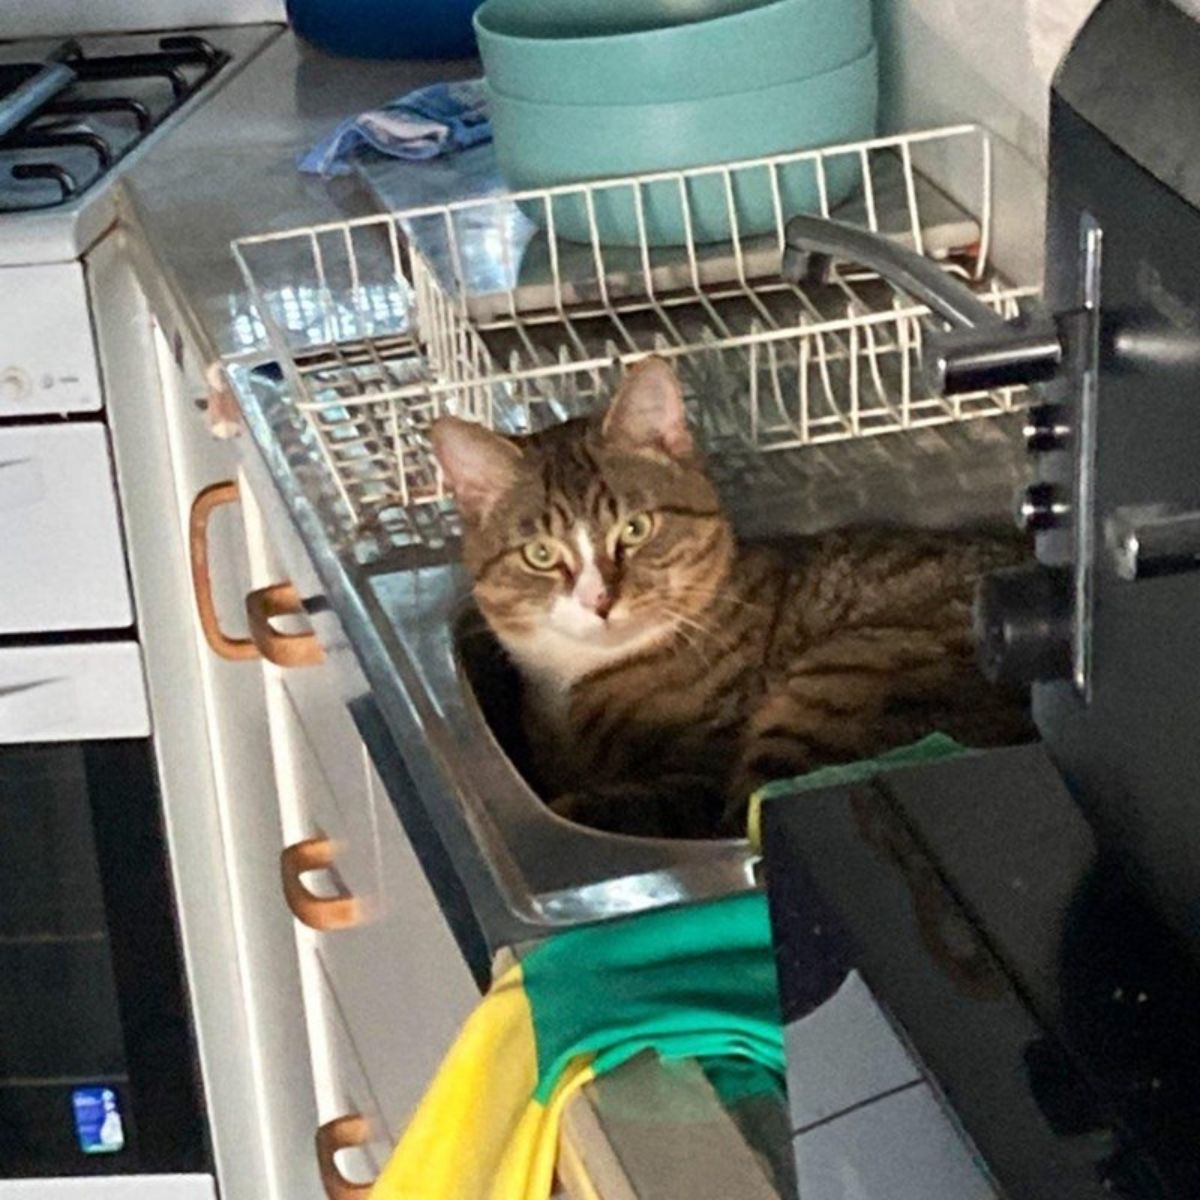 brown and white tabby cat sitting inside a kitchen sink